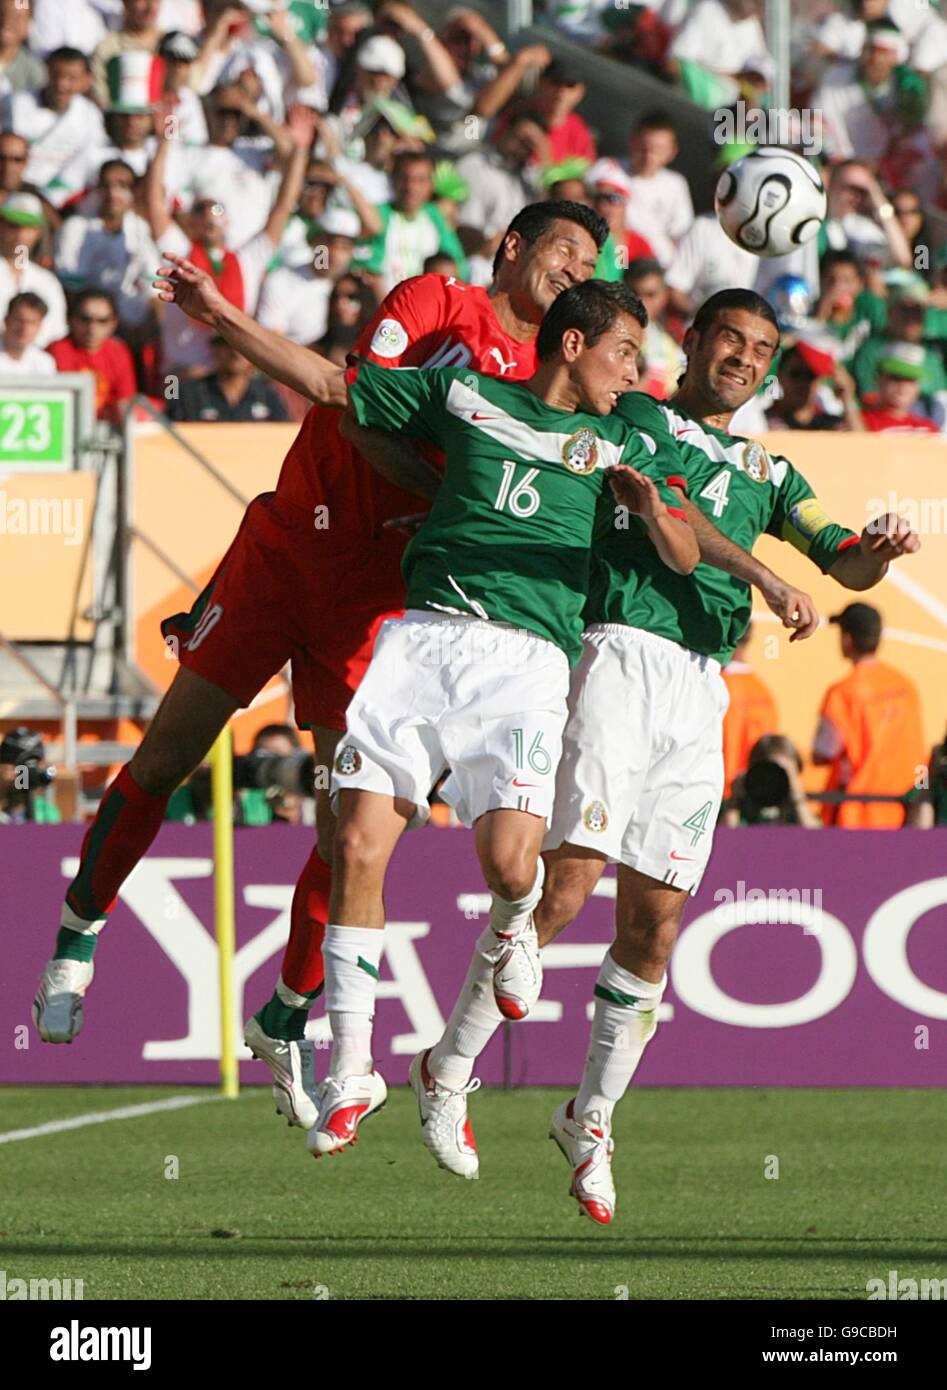 Soccer - 2006 FIFA World Cup Germany - Group D - Mexico v Iran - Franken-Stadion. Mexico's Mario Mendez (c) and Rafael Marquez (r) and Iran's Ali Daei (l) Stock Photo